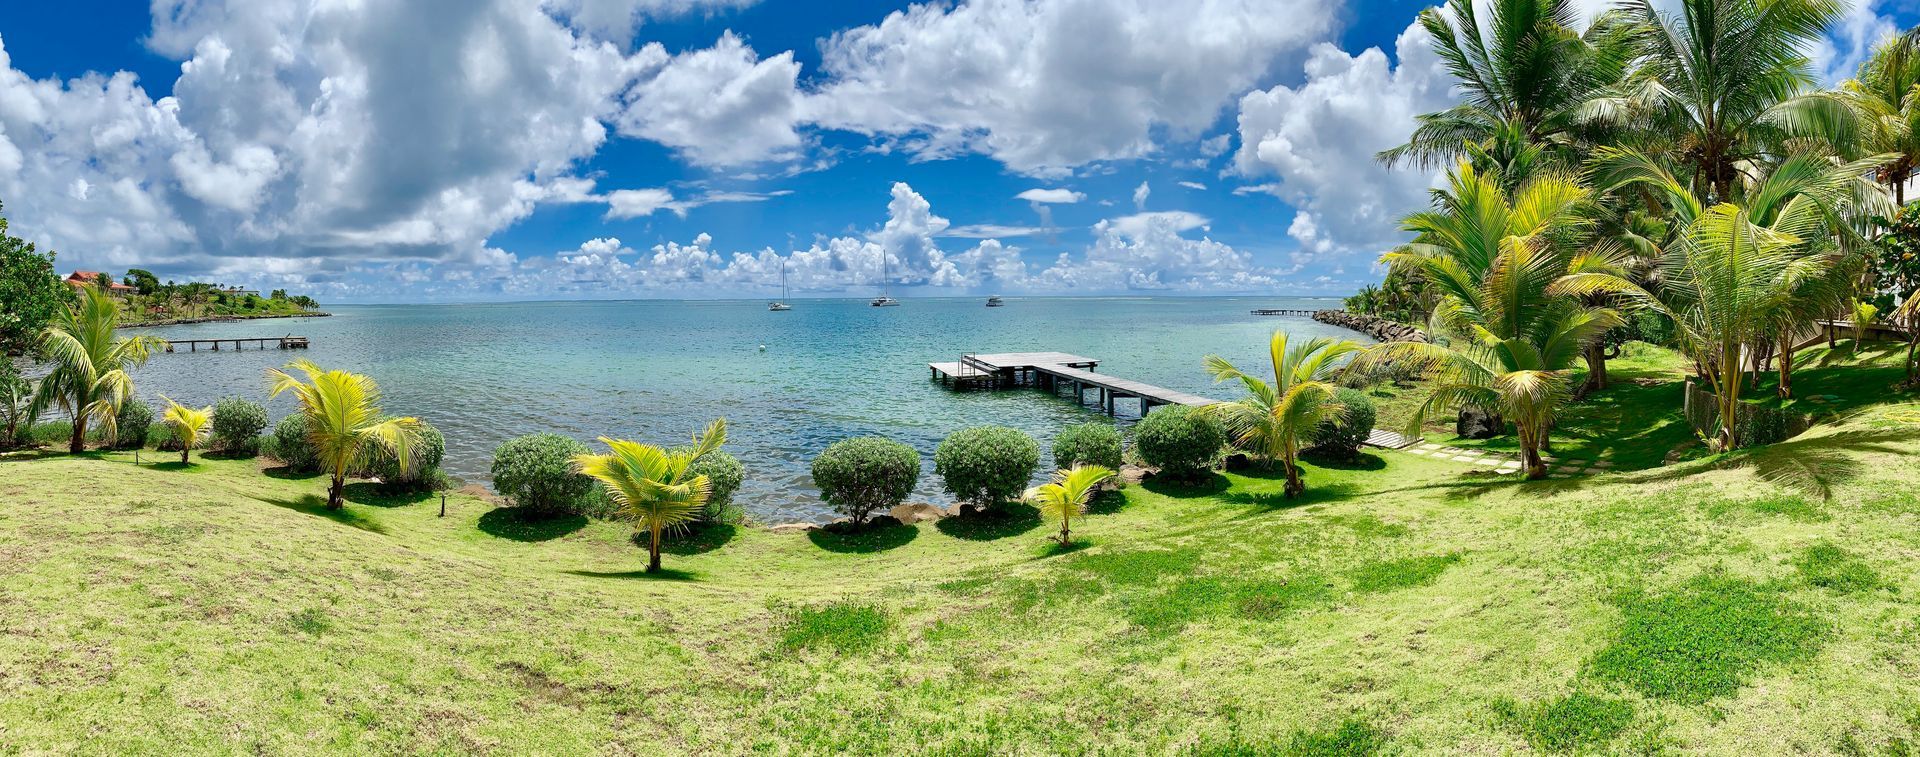 Picture of lagoon at Domaine des Fonds Blancs in Martinique